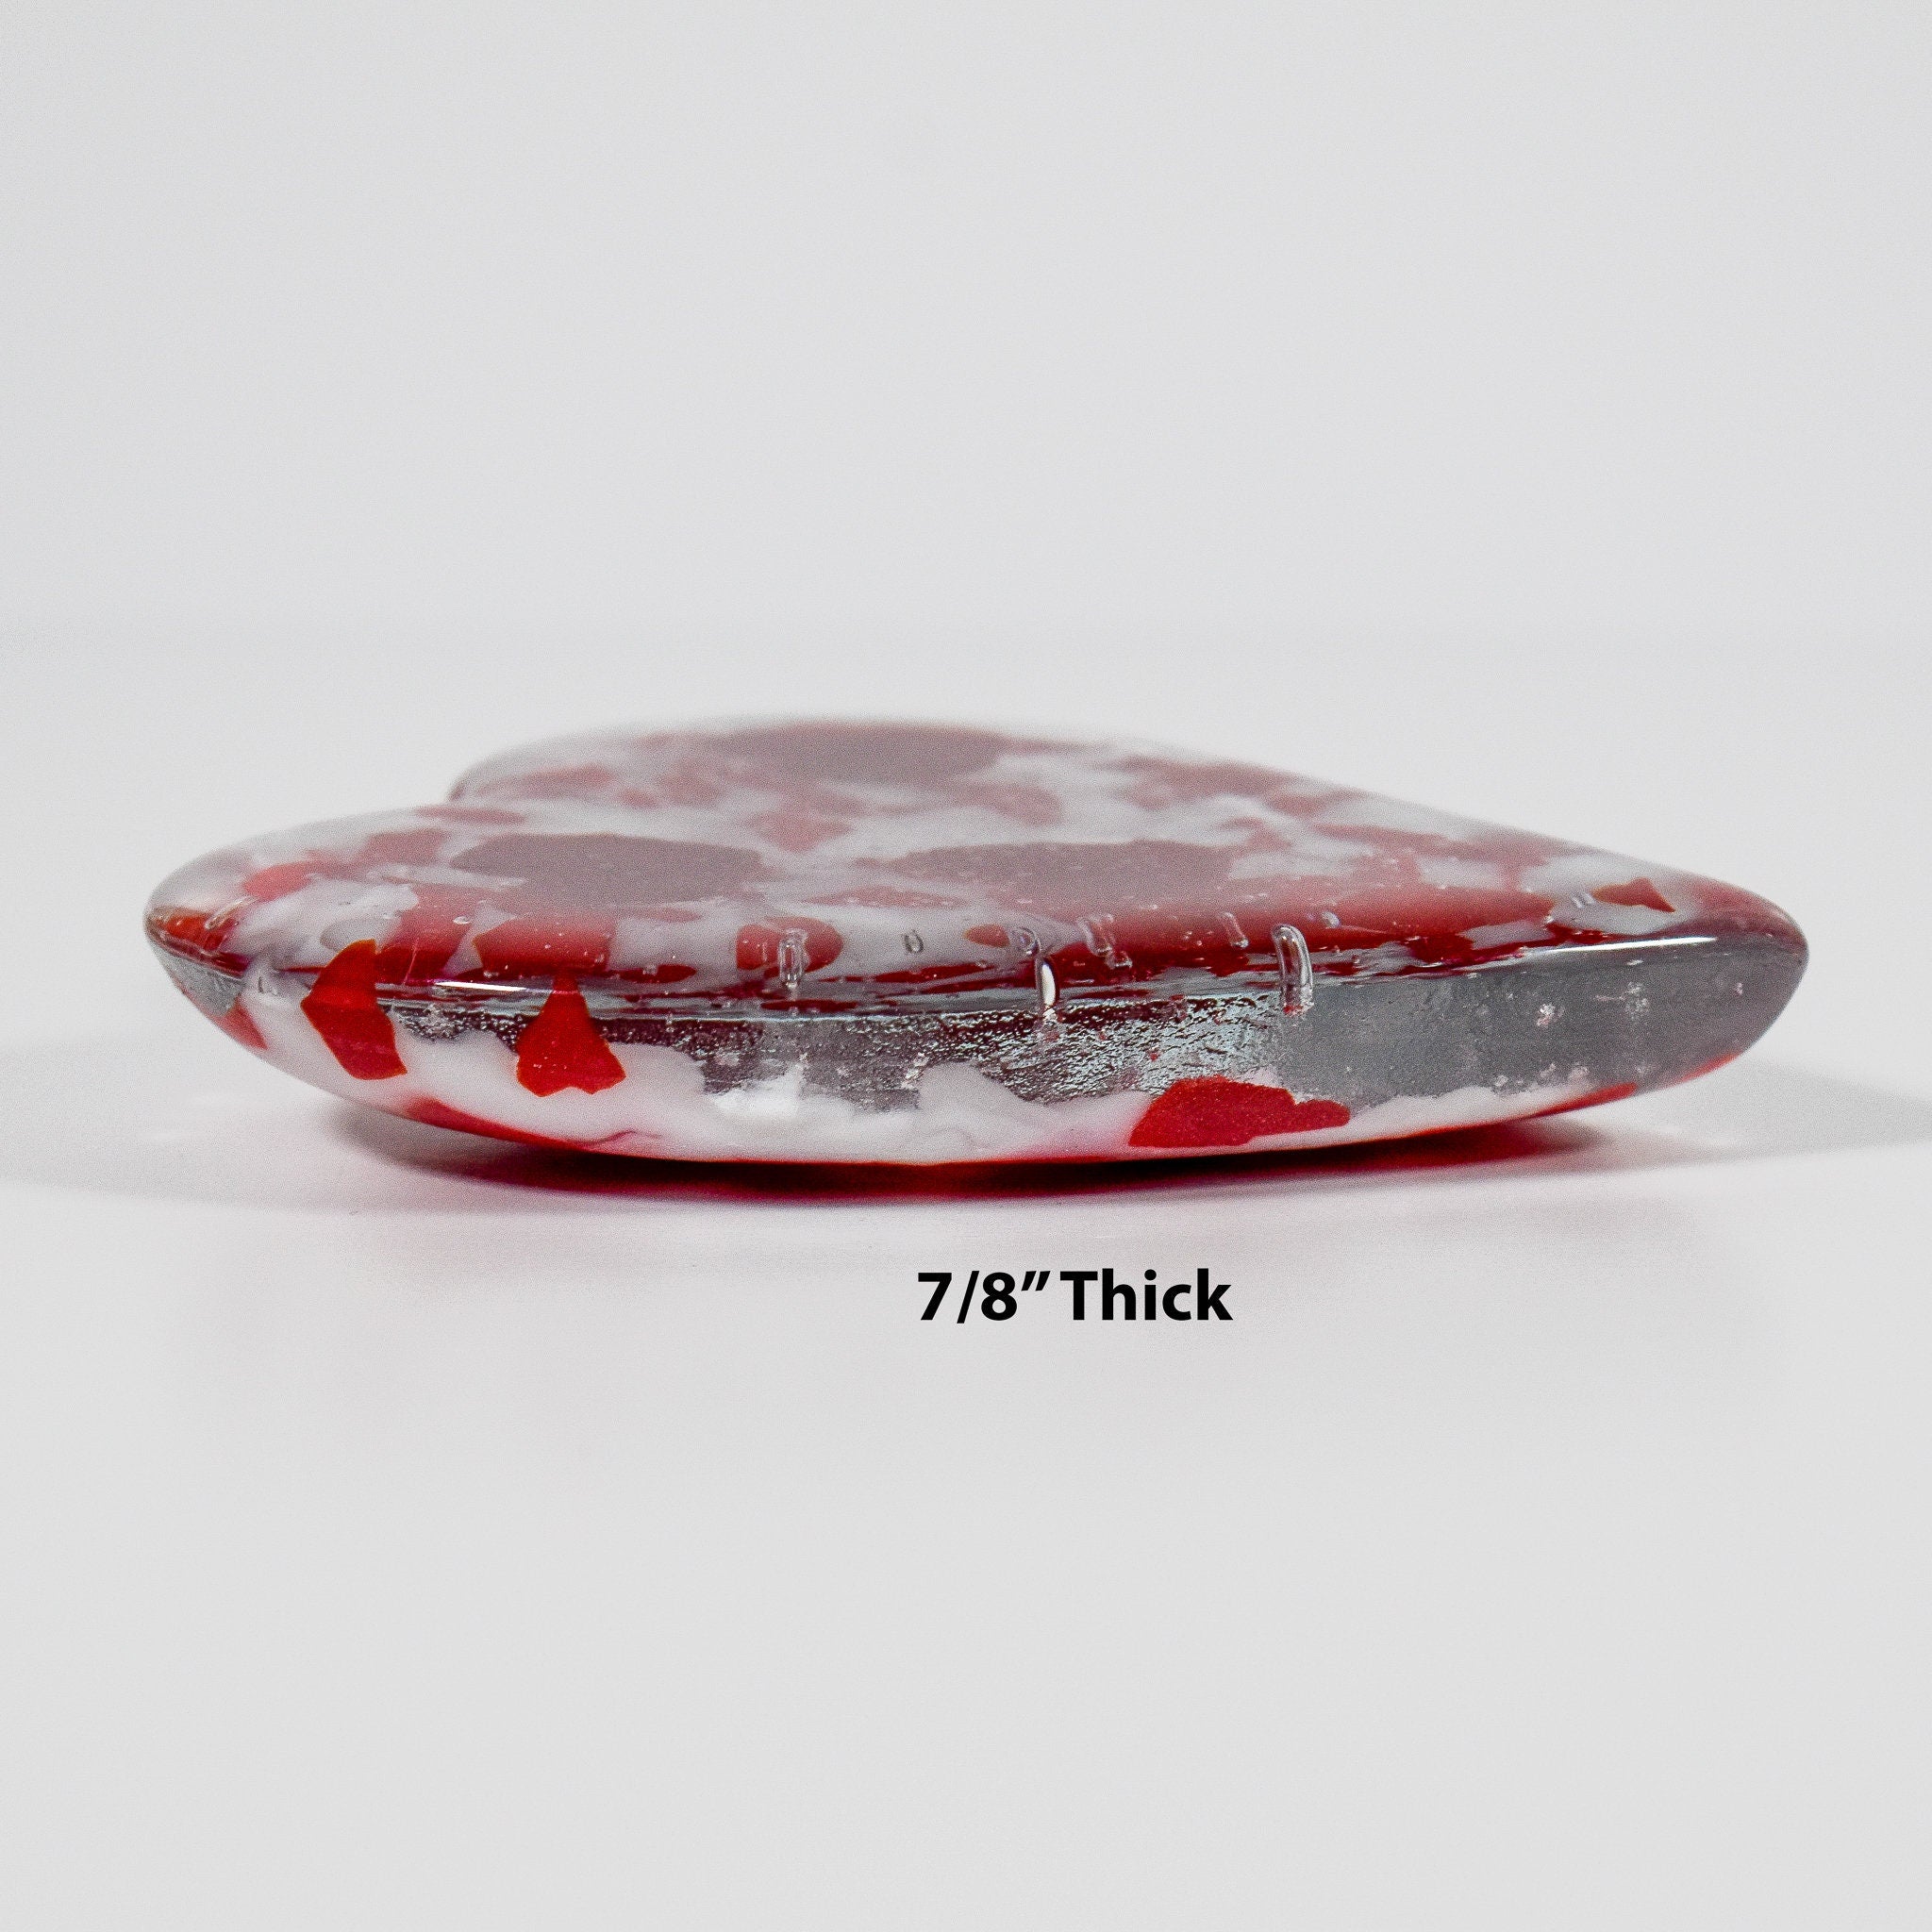 Standing Glass Paperweight with Hearts - Office and Desk Decor - Gift for Love